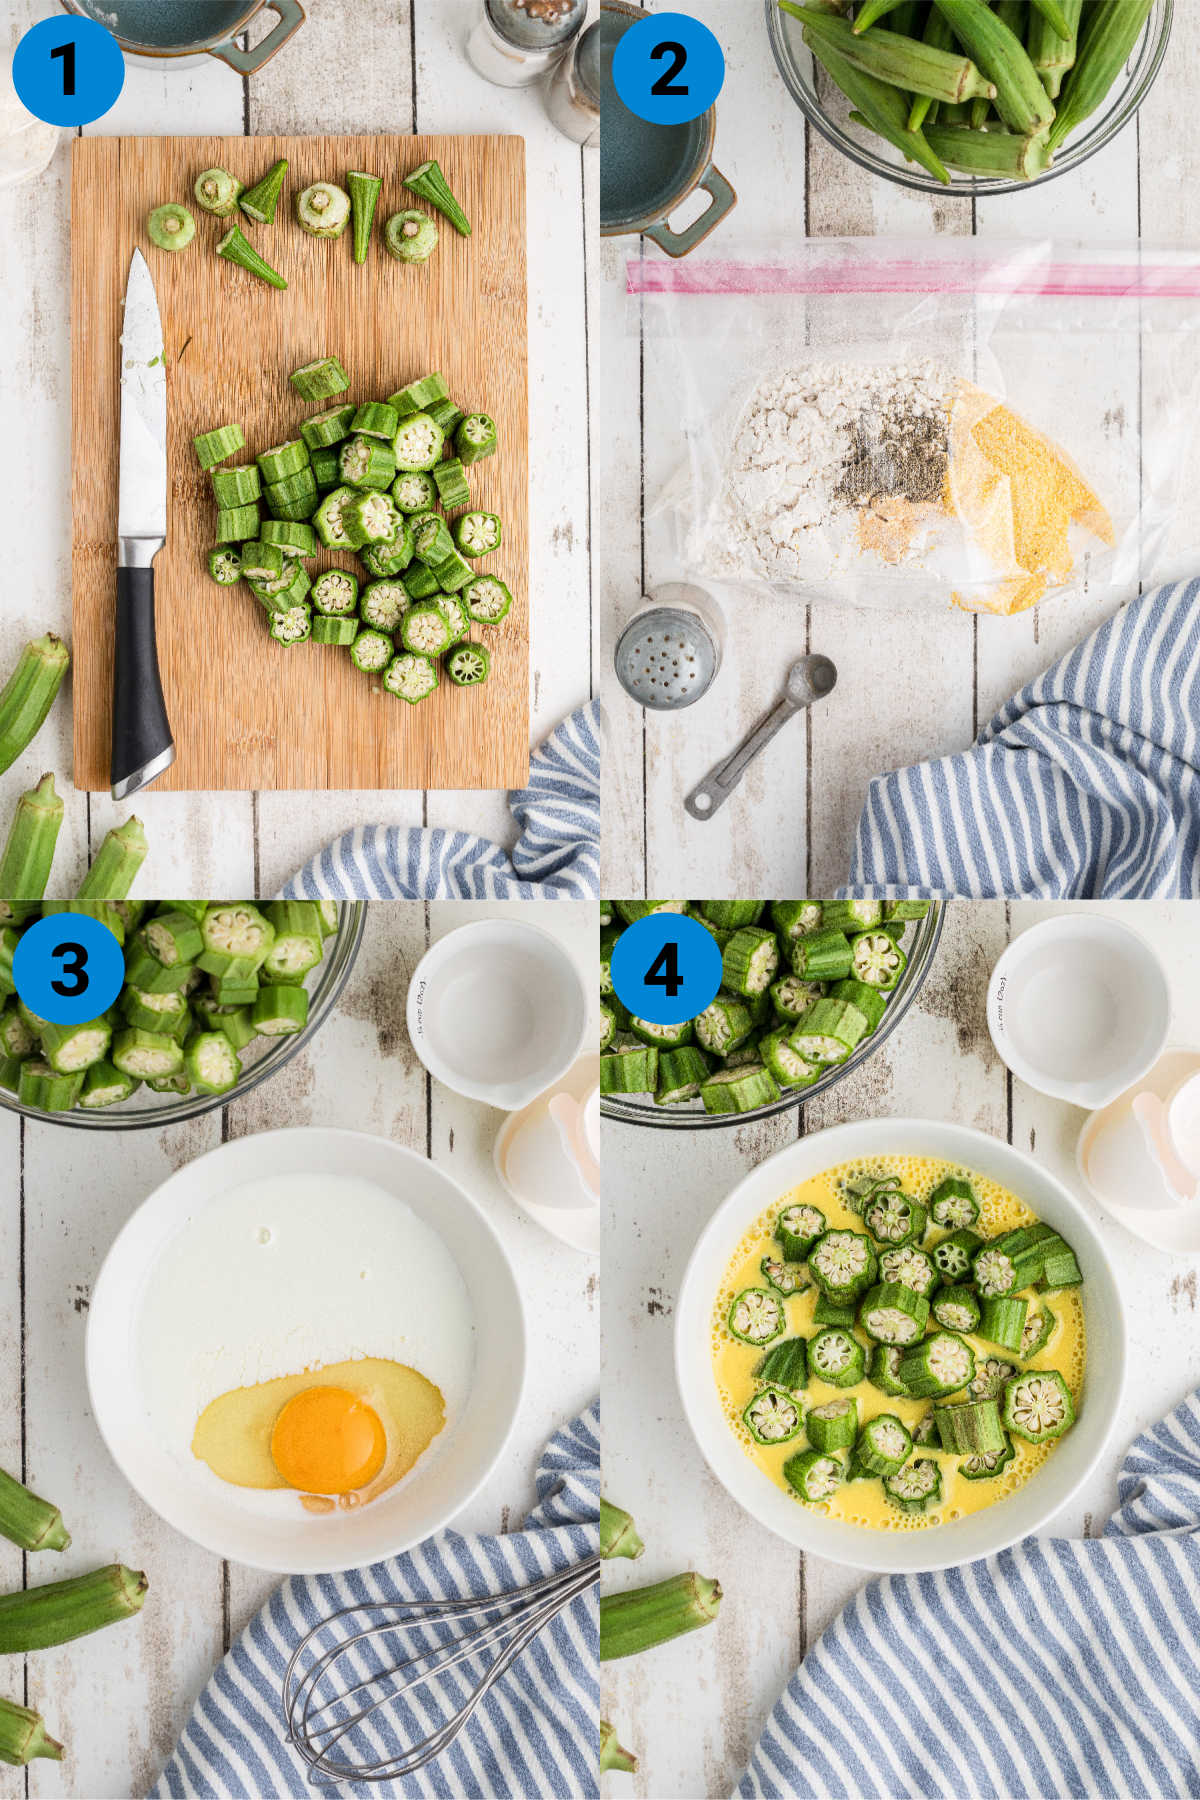 A collage of four images showing how to make old fashioned pan fried okra.